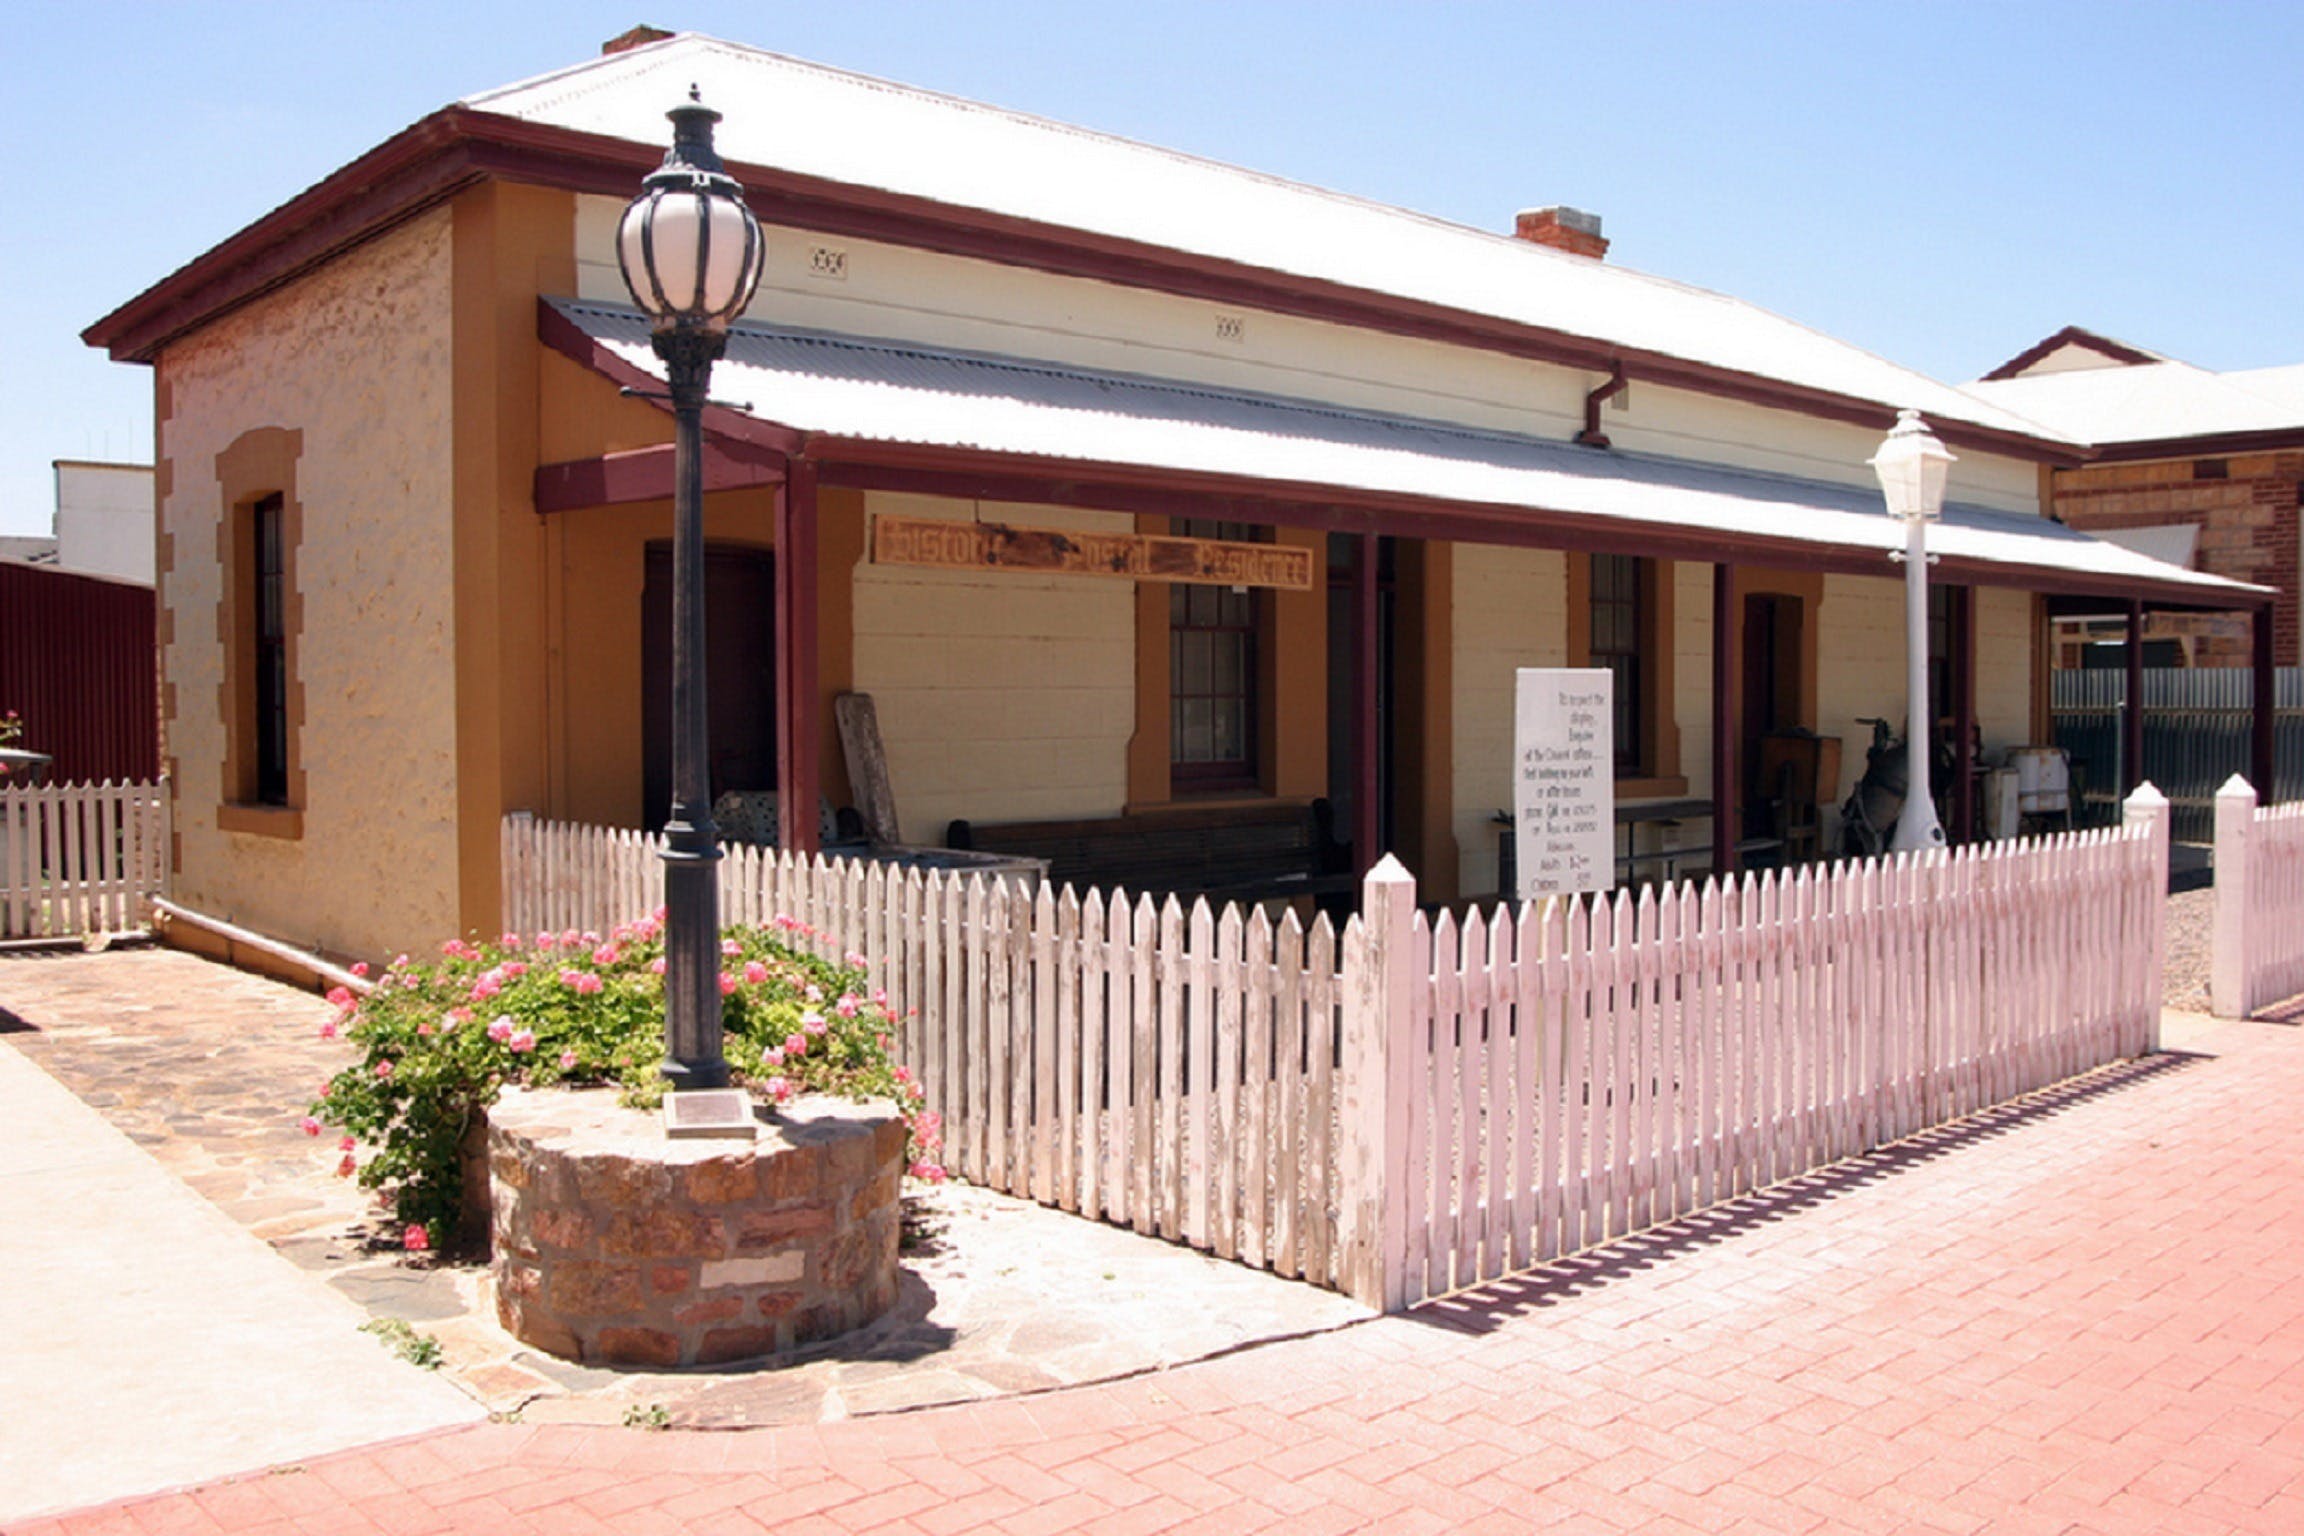 Franklin Harbour Historical Museum - Geraldton Accommodation